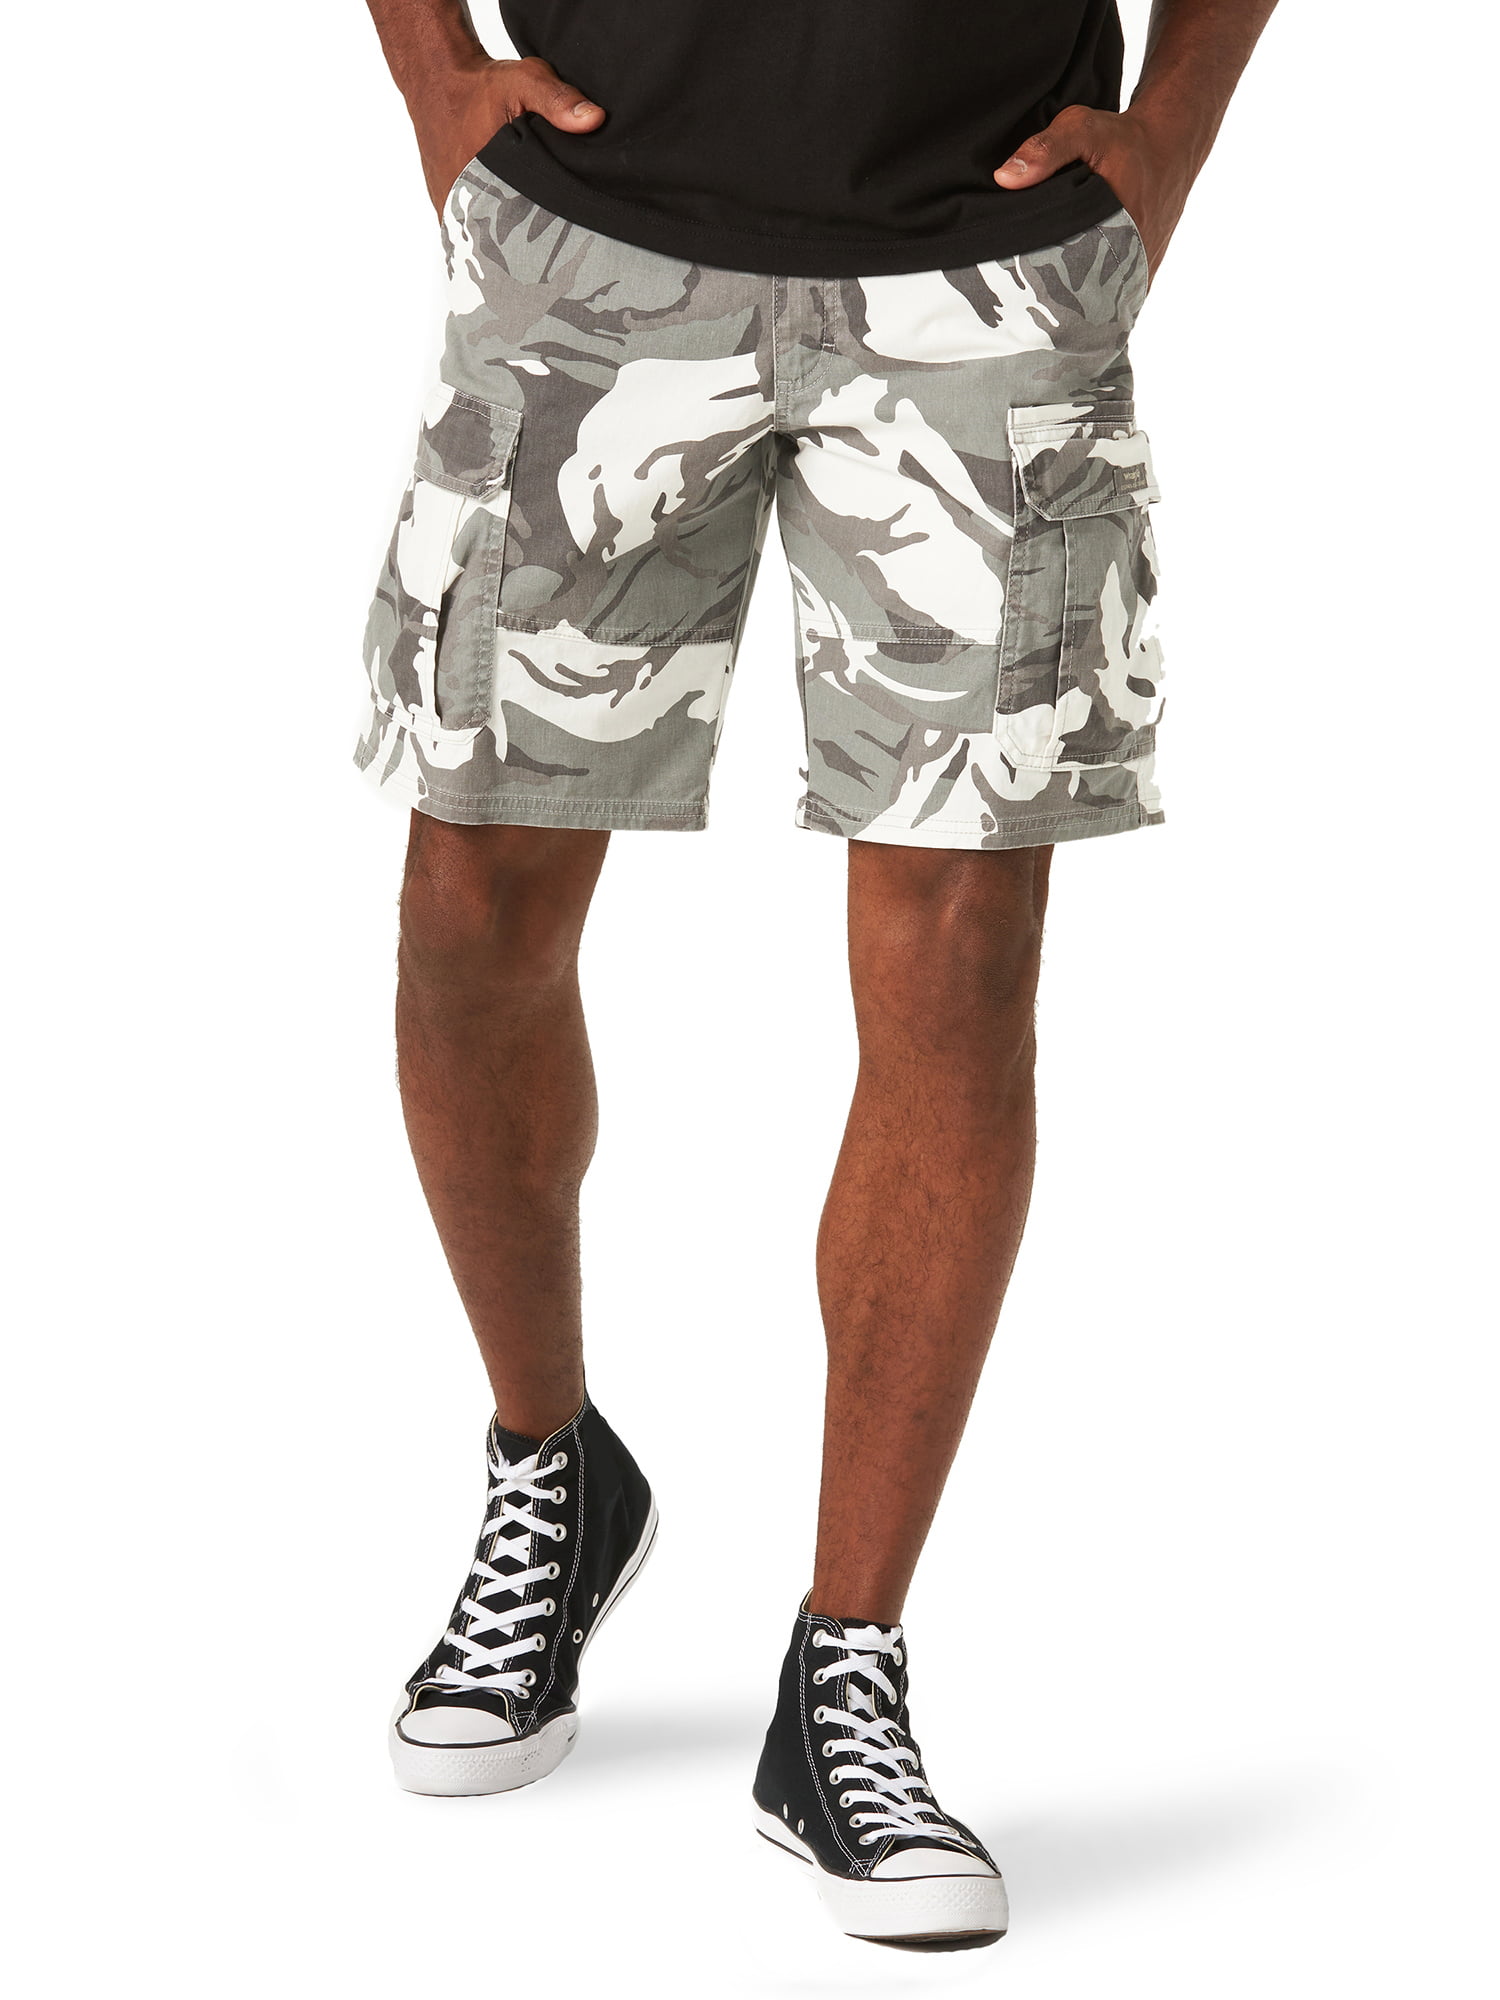 New Mens Wrangler Cotton Camouflage Cargo Shorts Relaxed Fit Waist Size 32 to 44 